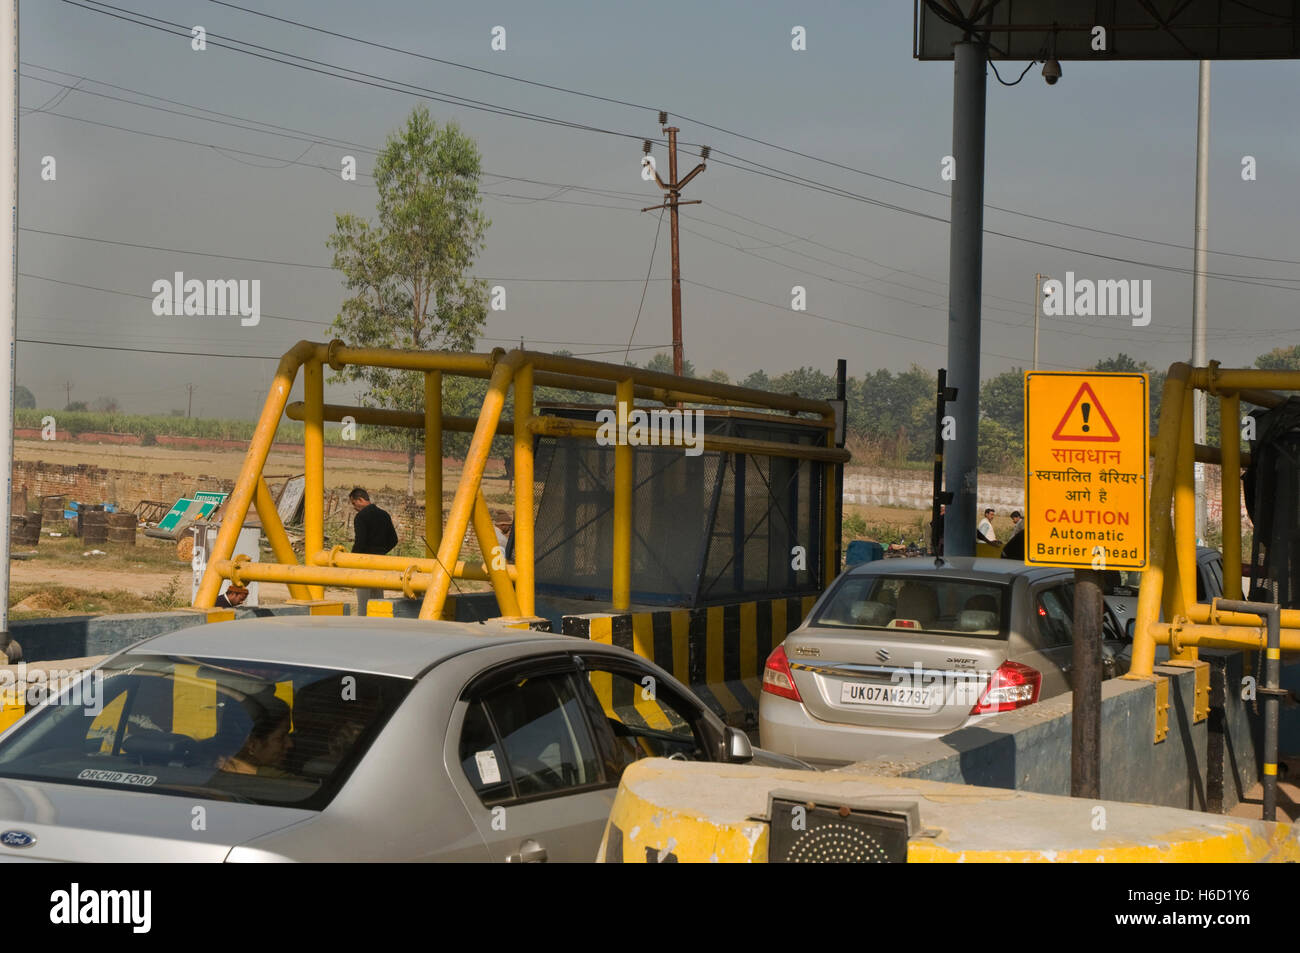 INDIA, Haryana, road from Delhi to Haridwar, traffic queuing at a toll booth Stock Photo